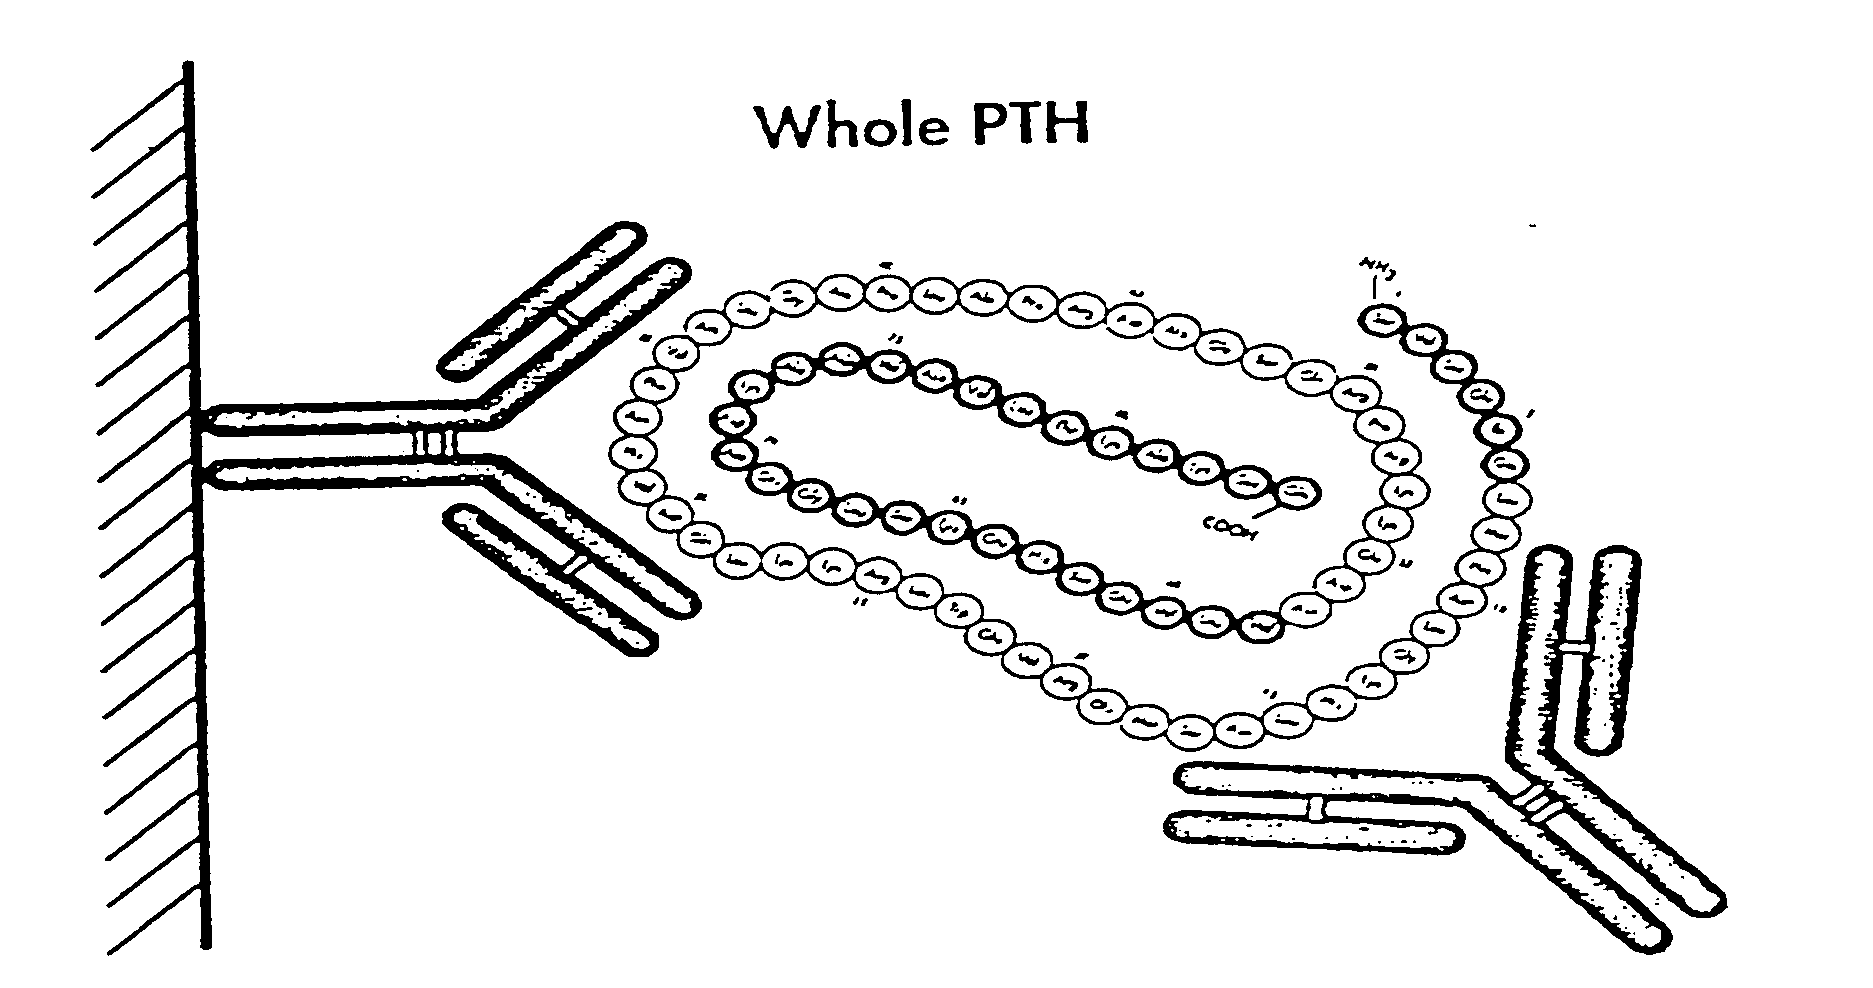 Methods, kits, and antibodies for detecting parathyroid hormone